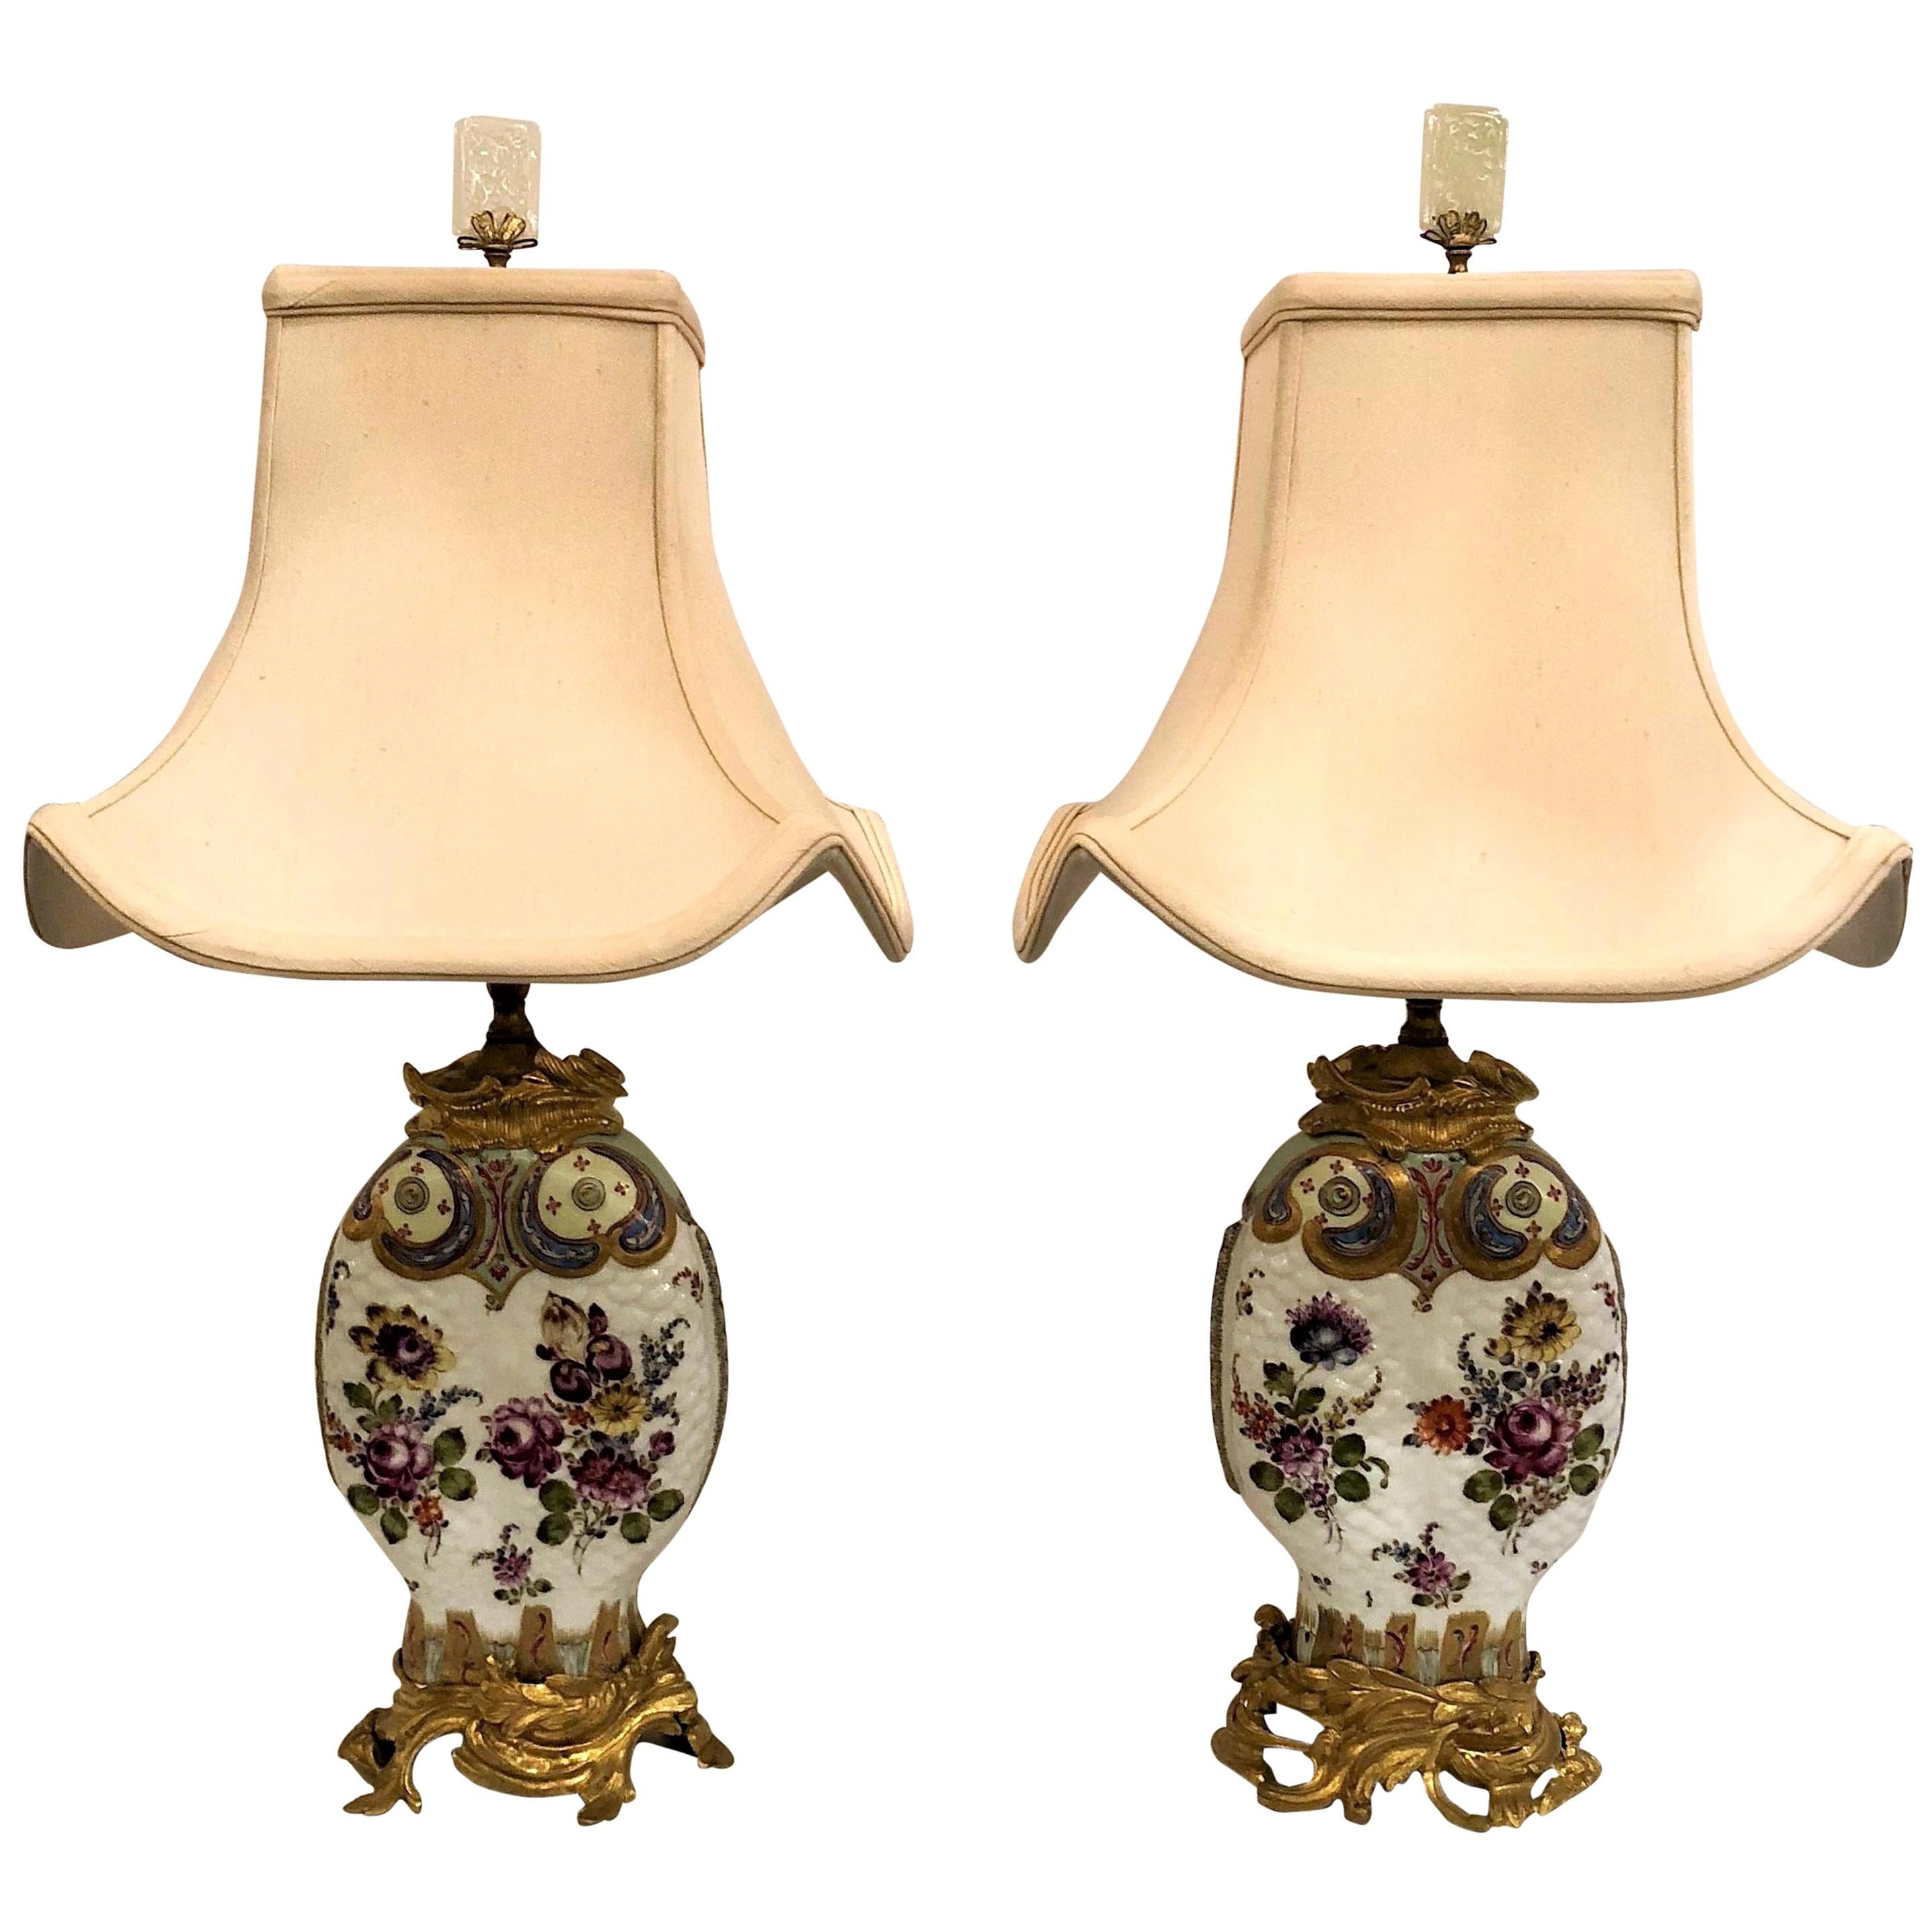 Pair of Antique Chinoiserie Porcelain Lamps with Ormolu Mounts For Sale